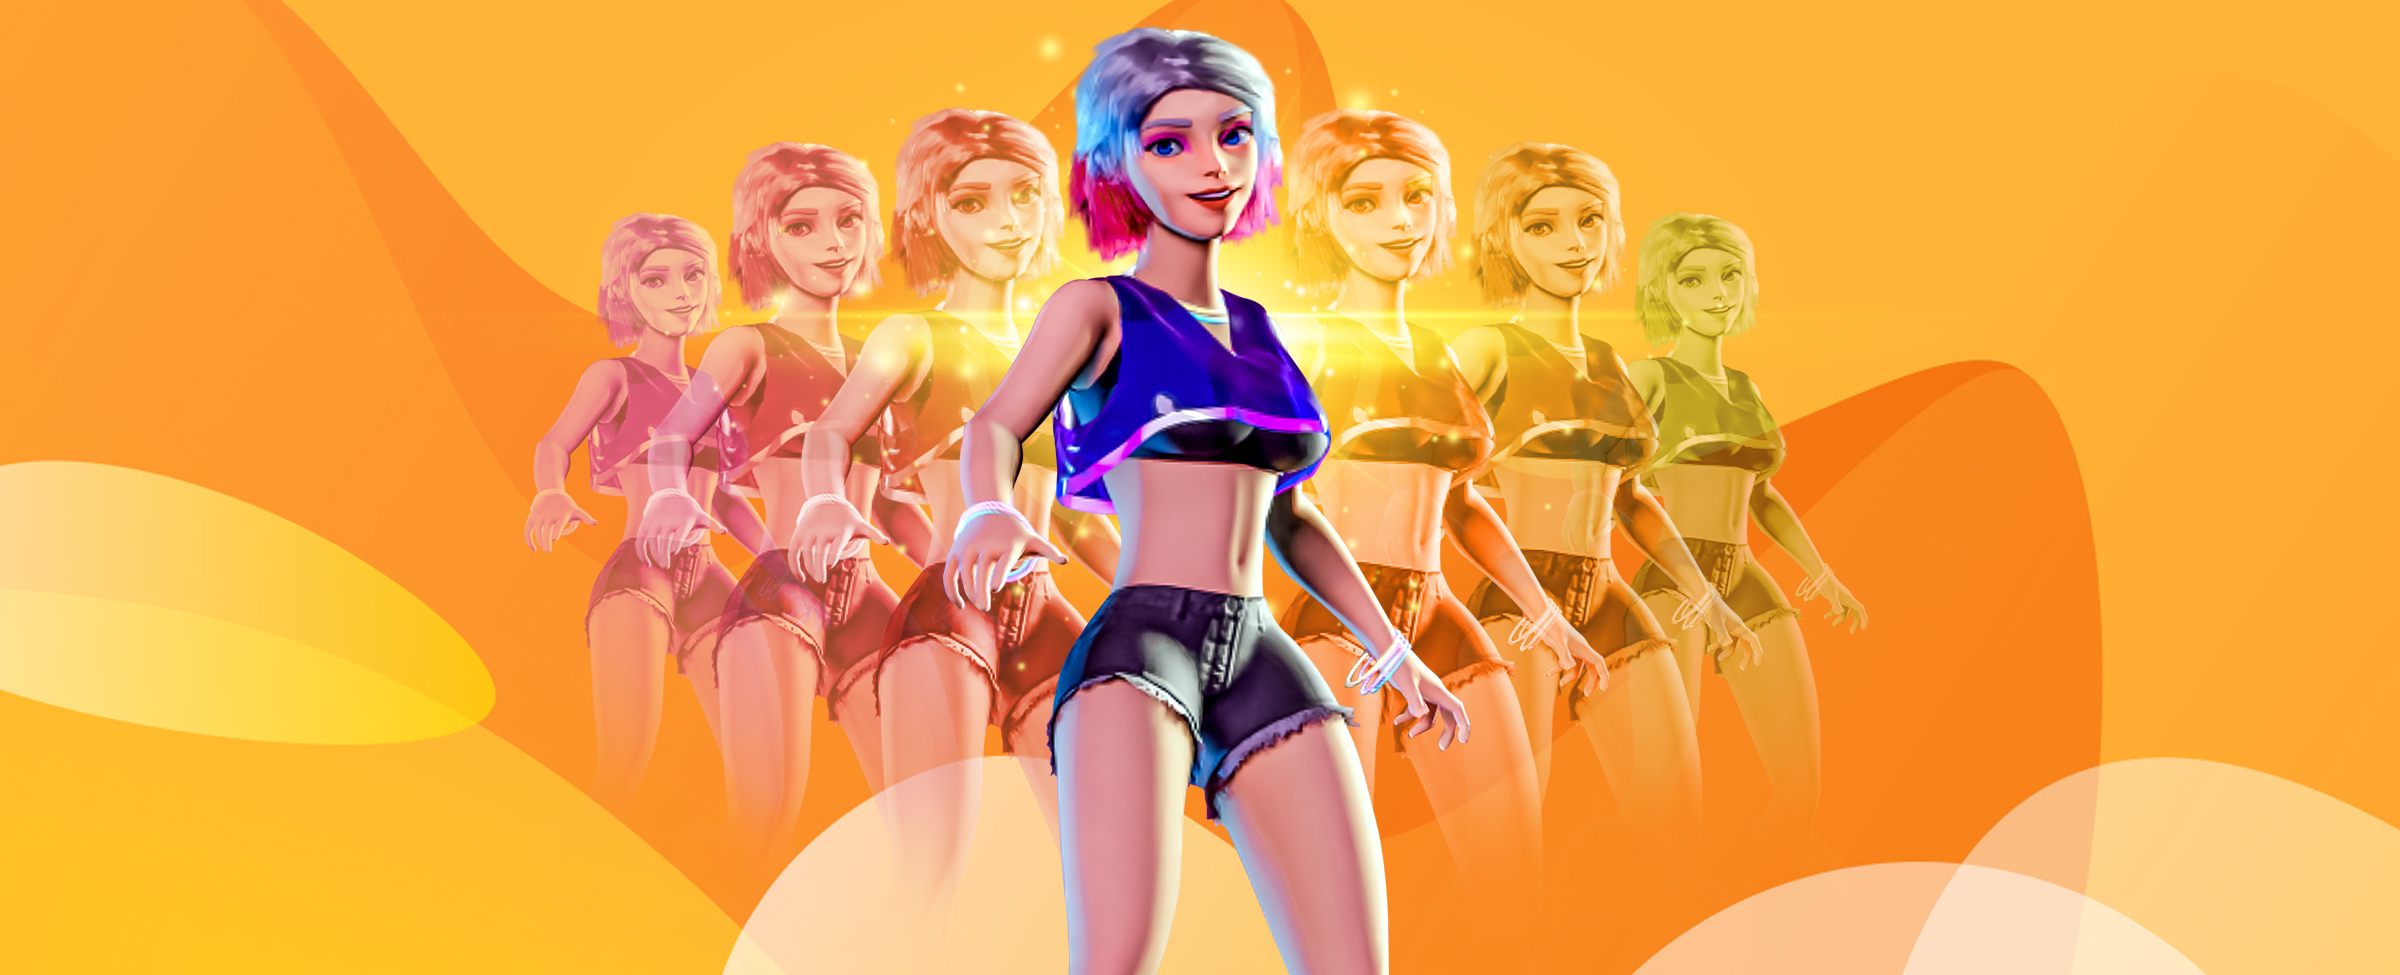 A 3D-illustrated character of a young female girl in rave costume from the SlotsLV game Raving Wildz stands in front of the image with six other carbon copies of her body triangulating out from behind her in holograph form